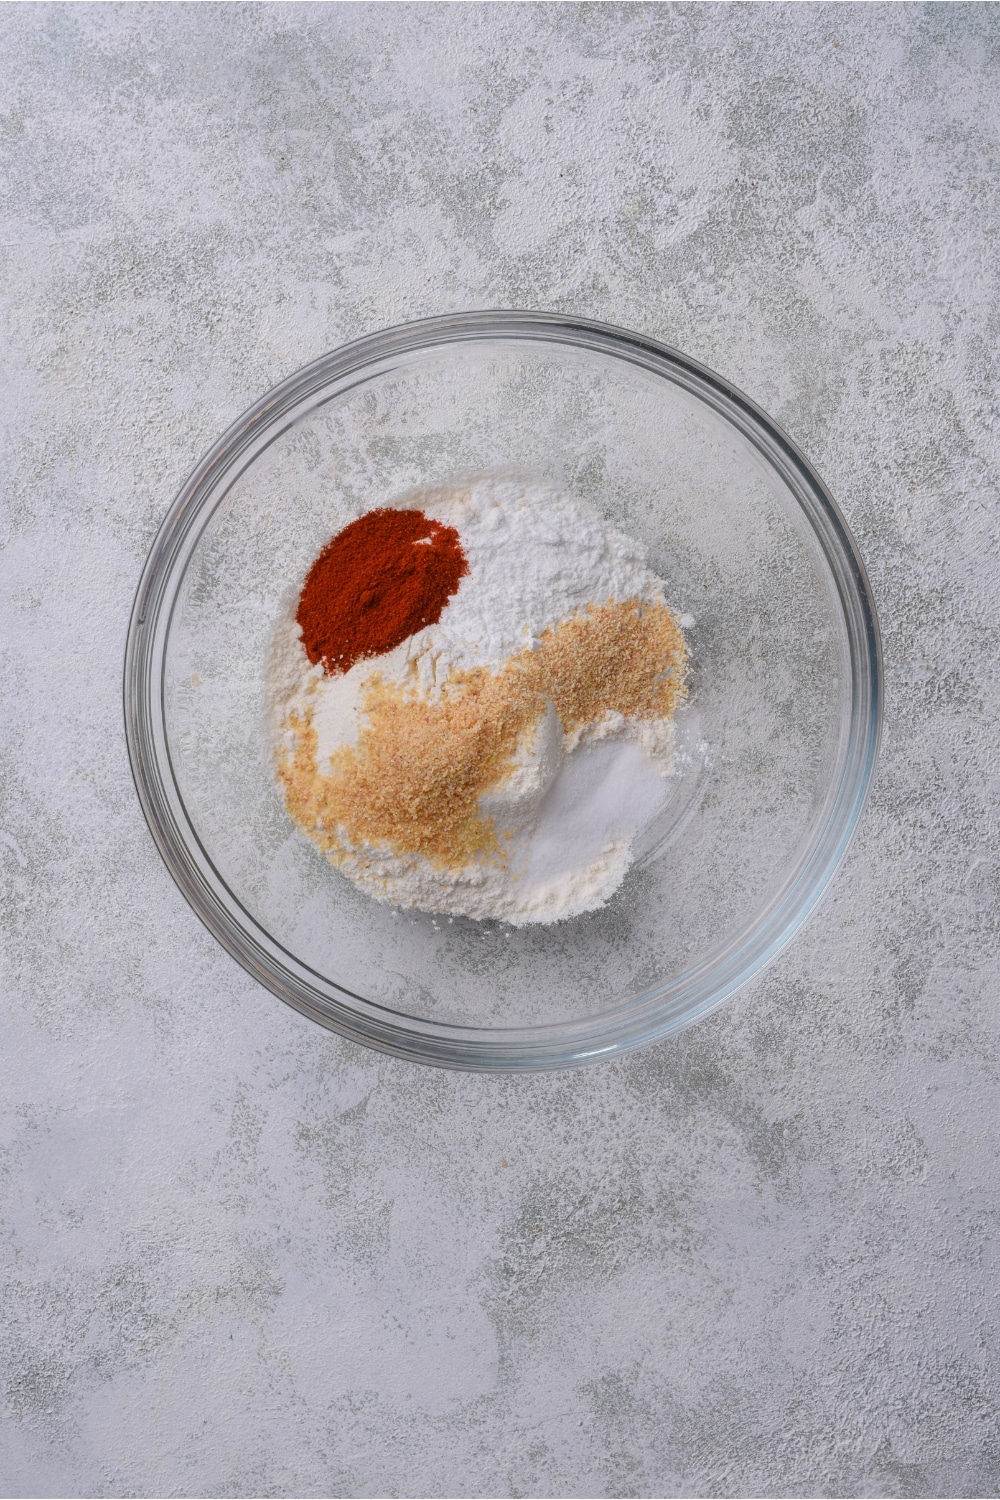 Paprika, flour, seasonings, and baking powder in a glass bowl on a counter.